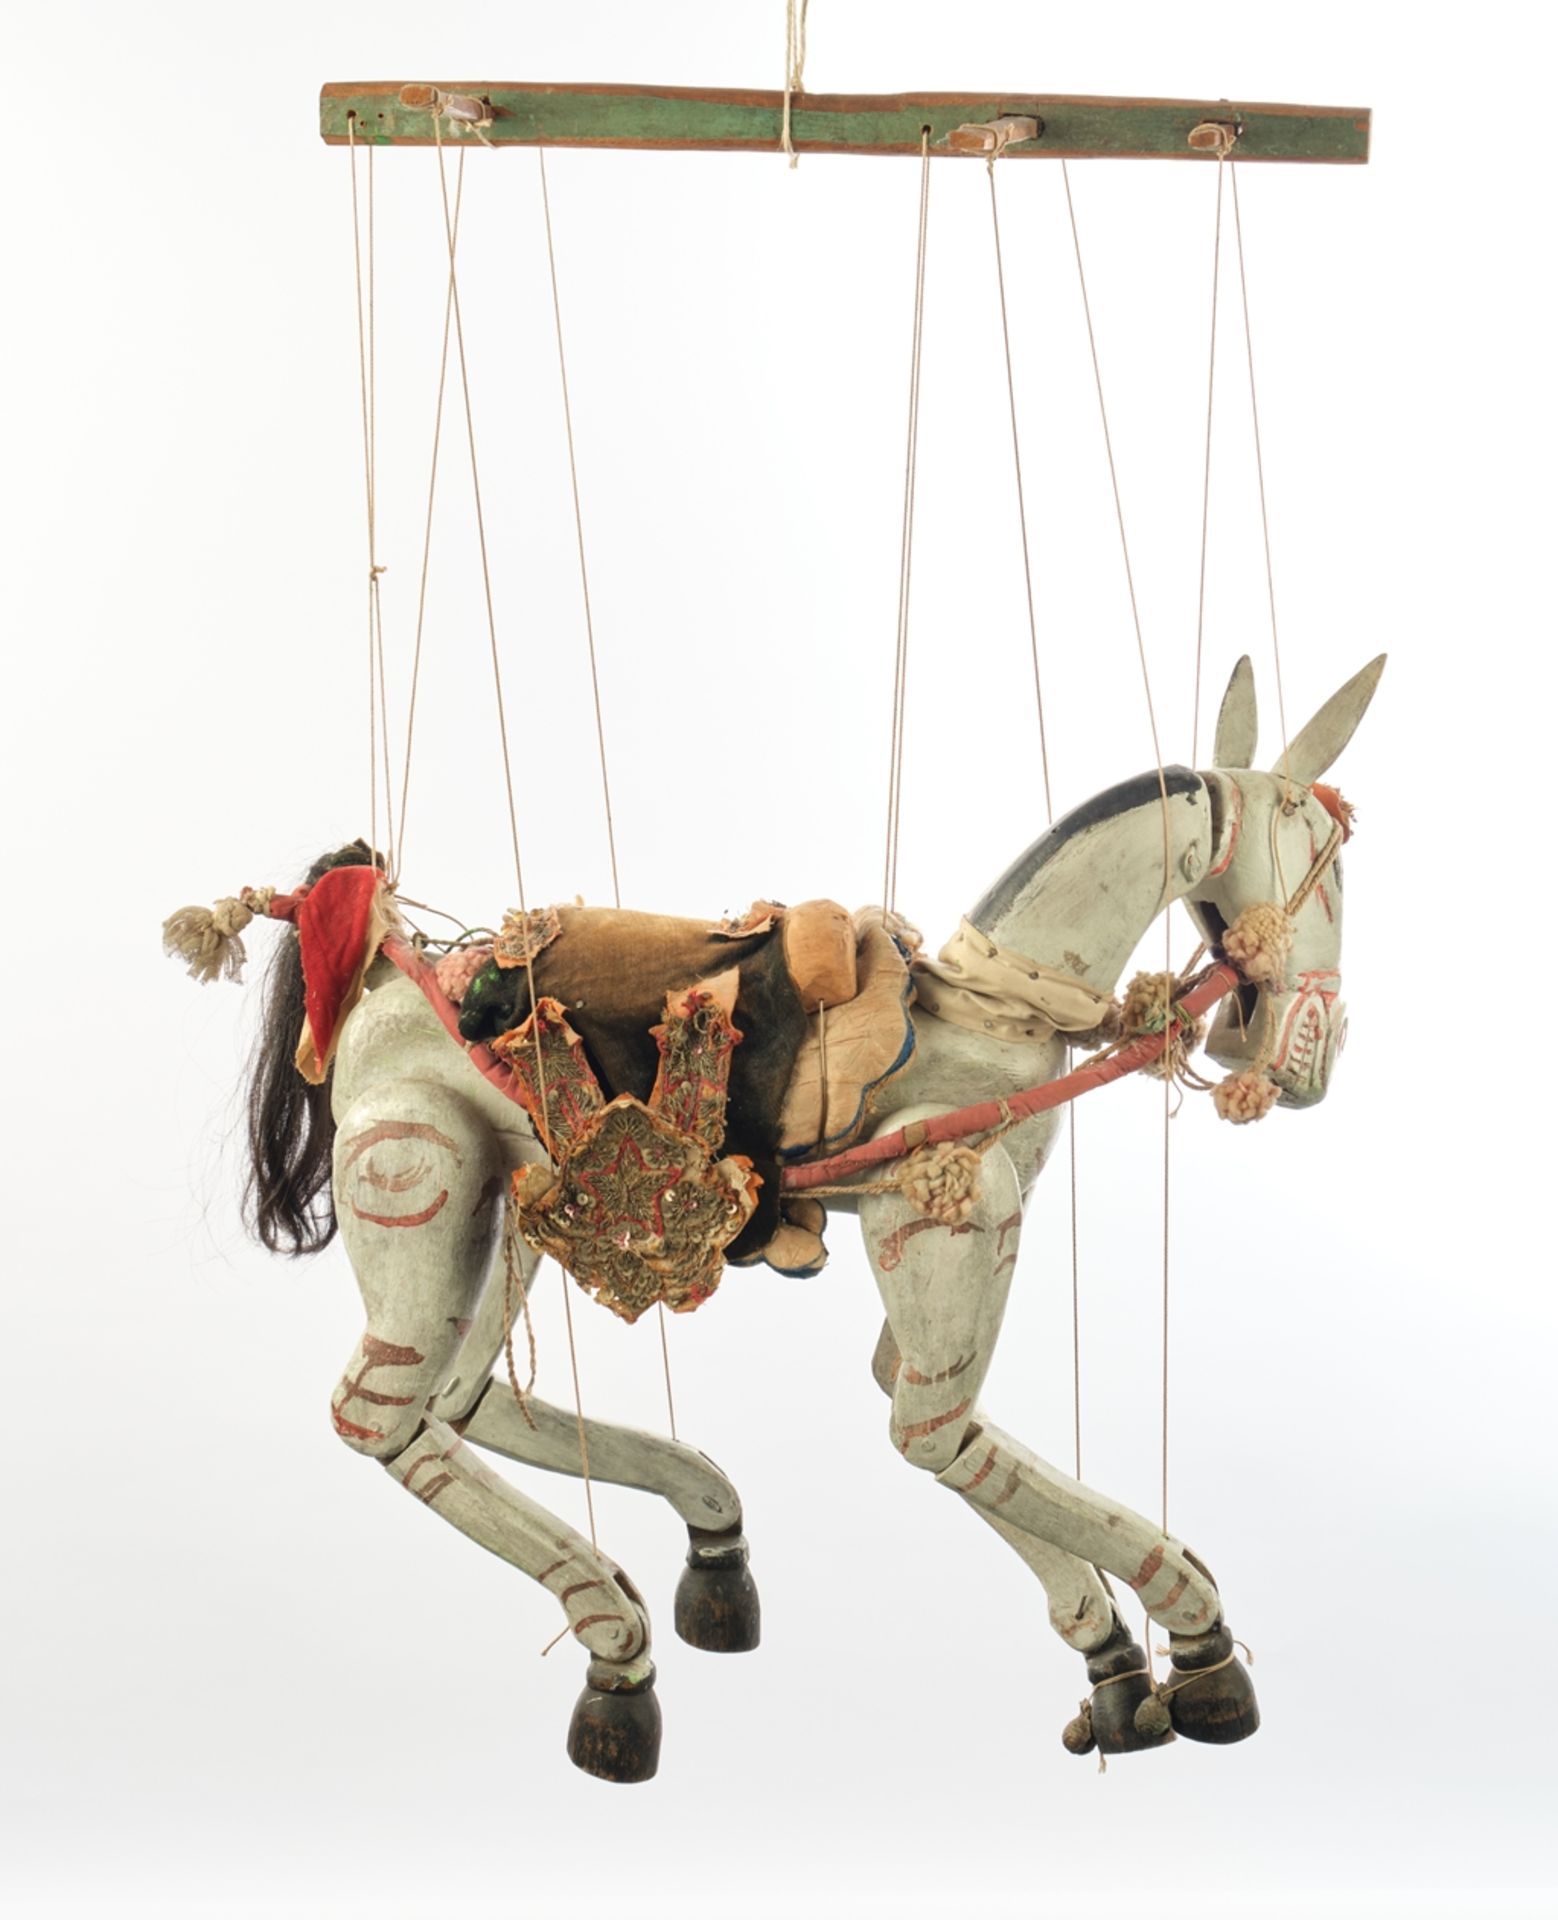 Marionette,,"Horse", Burma, 2nd half 20th century, wood, painted, fabric saddle, embroidered with b - Image 3 of 4